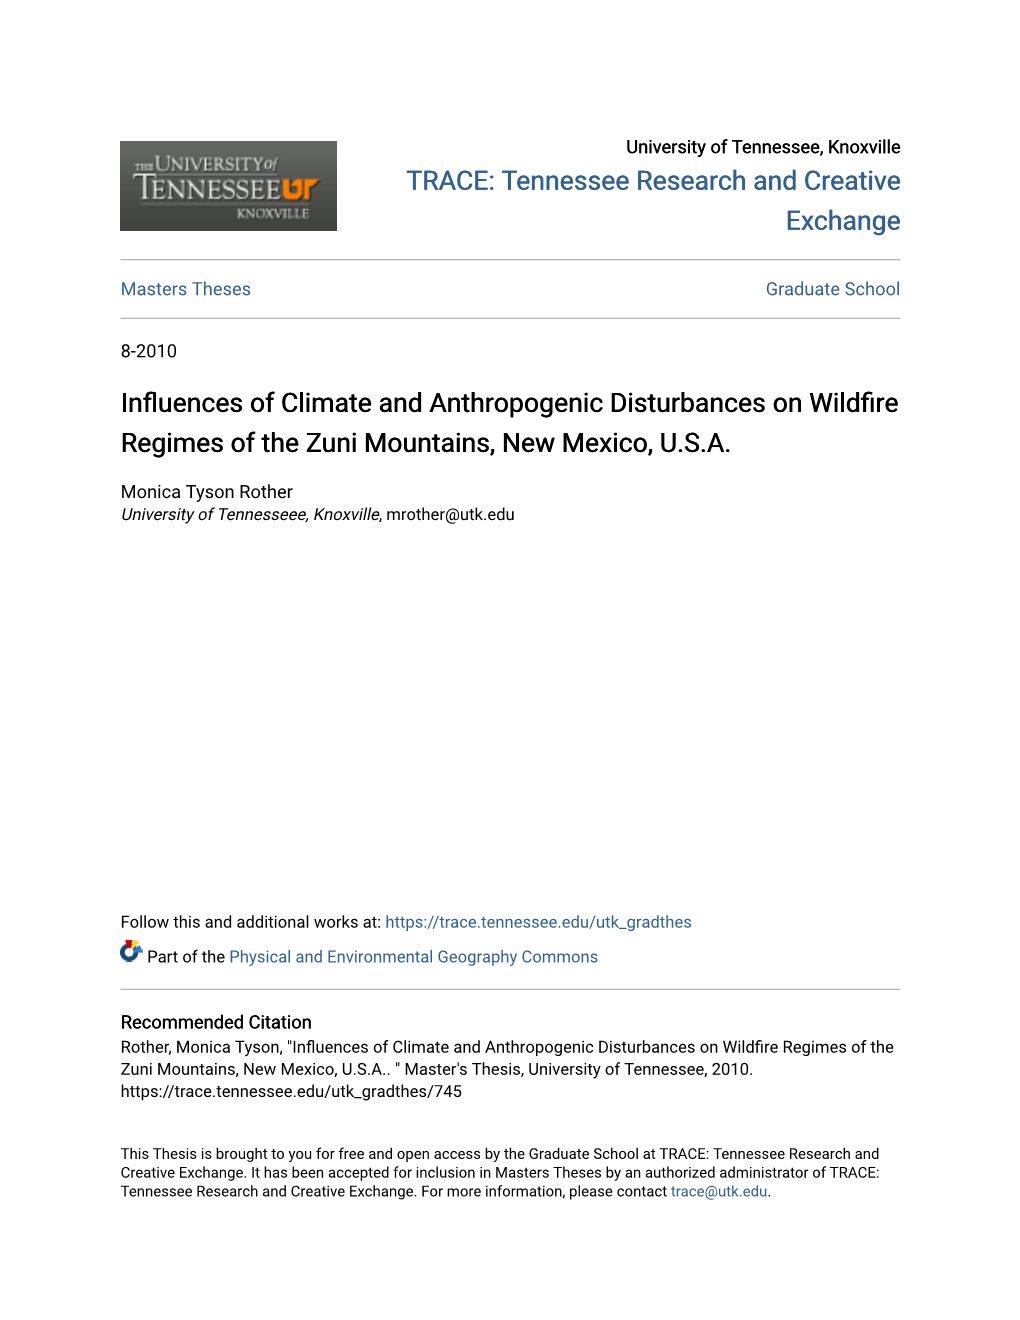 Influences of Climate and Anthropogenic Disturbances on Wildfire Regimes of the Zuni Mountains, New Mexico, U.S.A